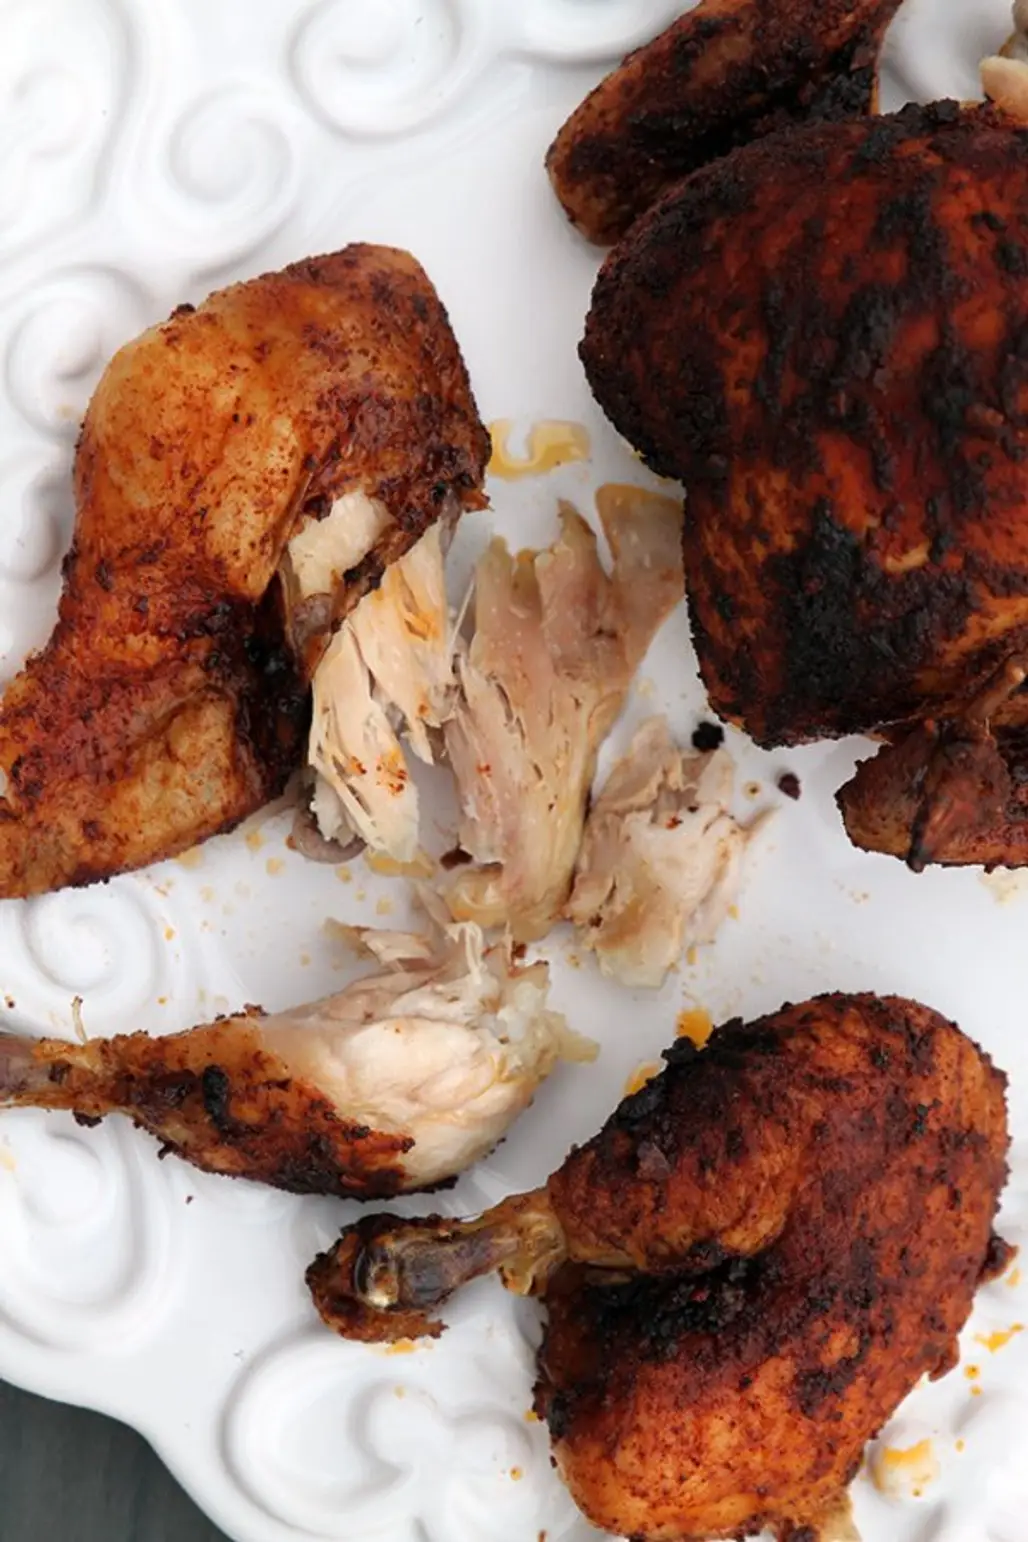 Sometimes a Rotisserie Chicken Can Temporarily Turn into Your BFF